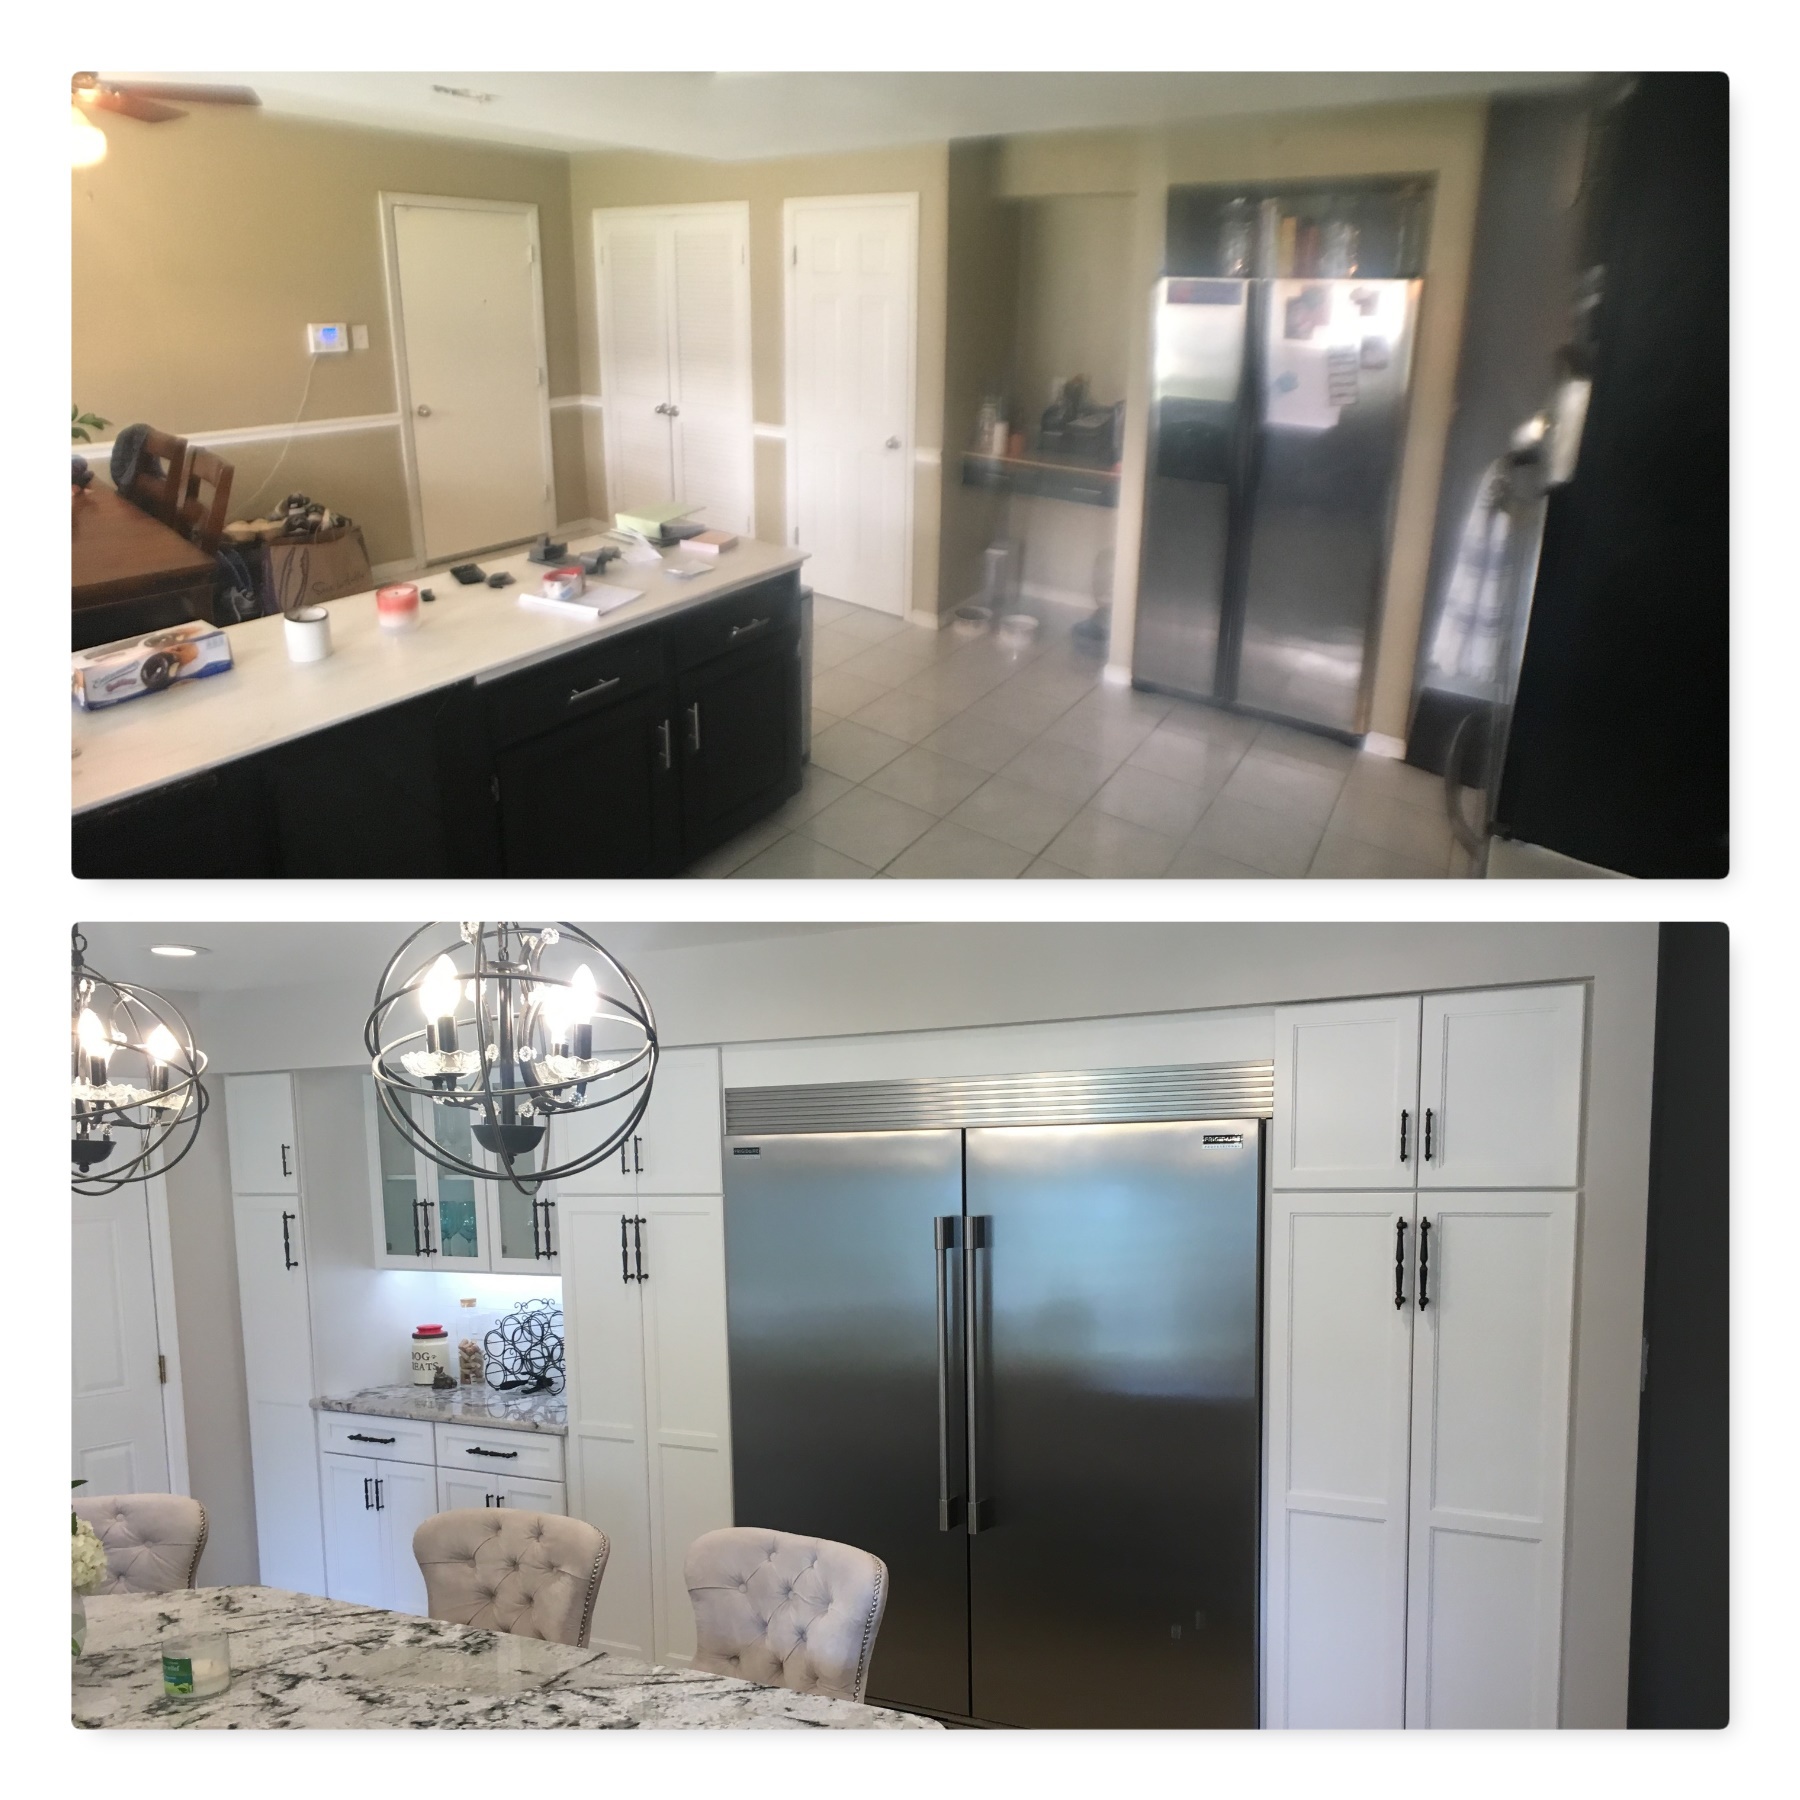 Before and After Kitchen Remodel